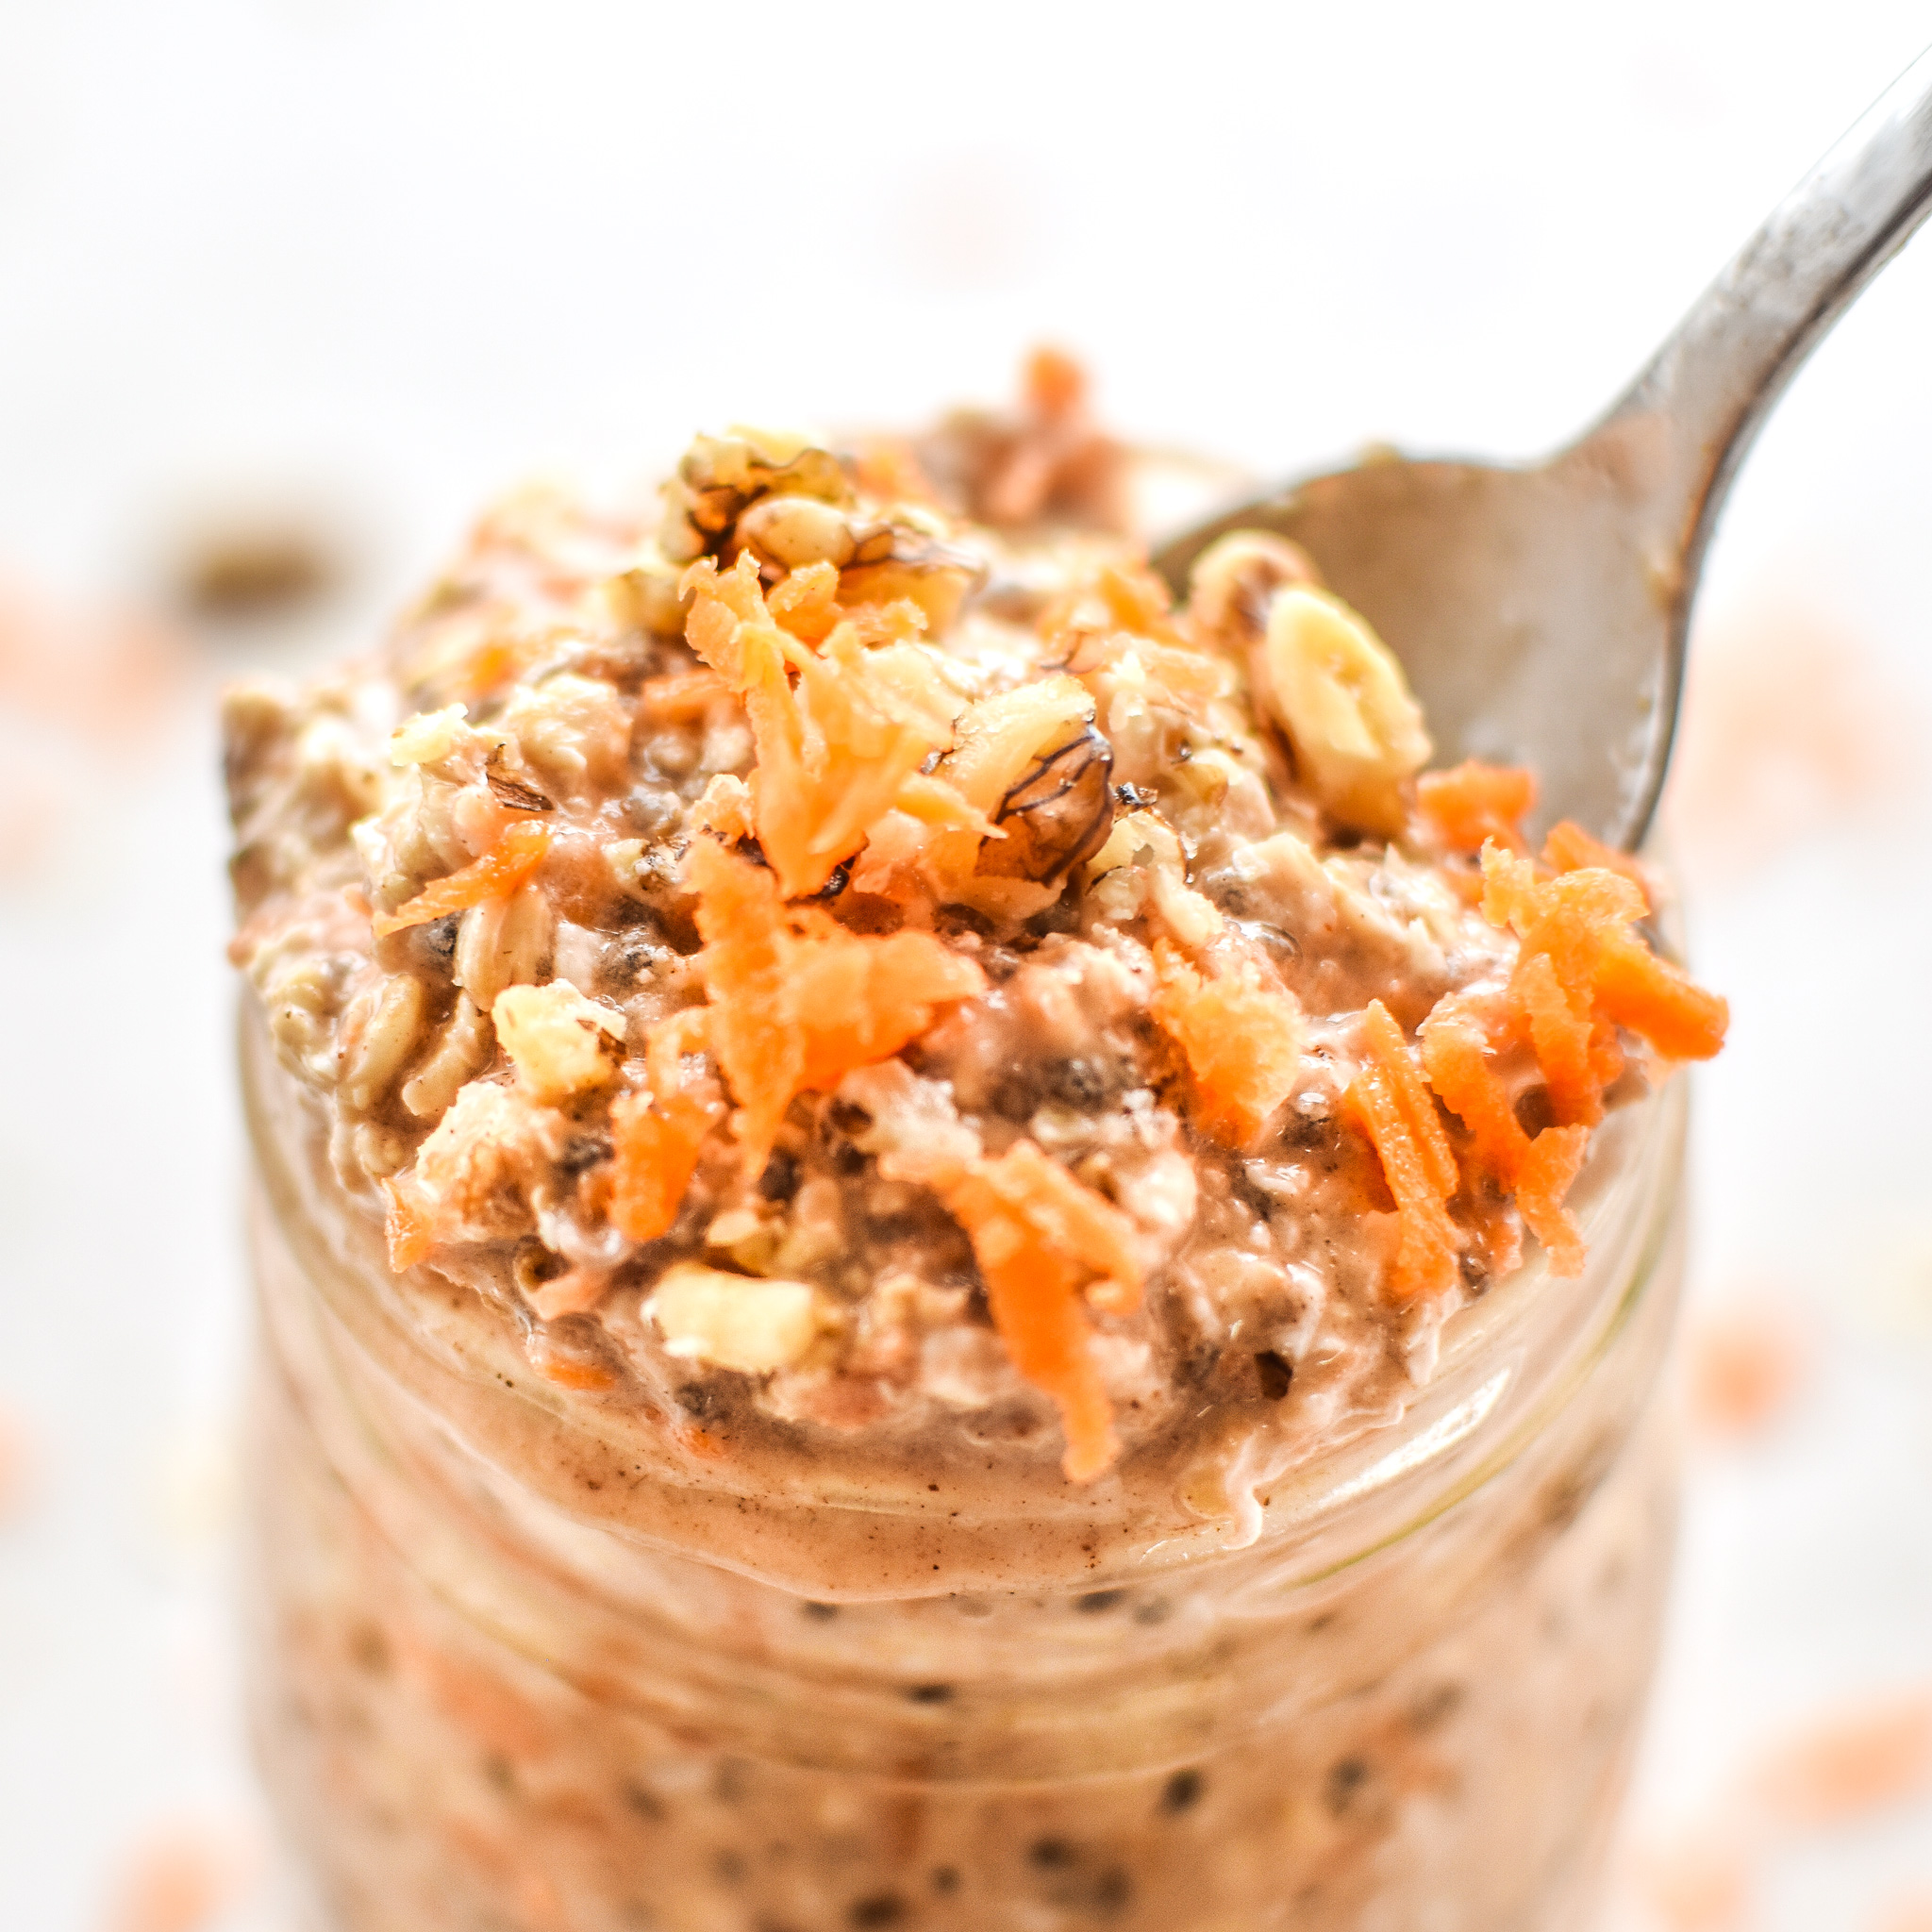 Take a spoonful of carrot cake overnight oats!